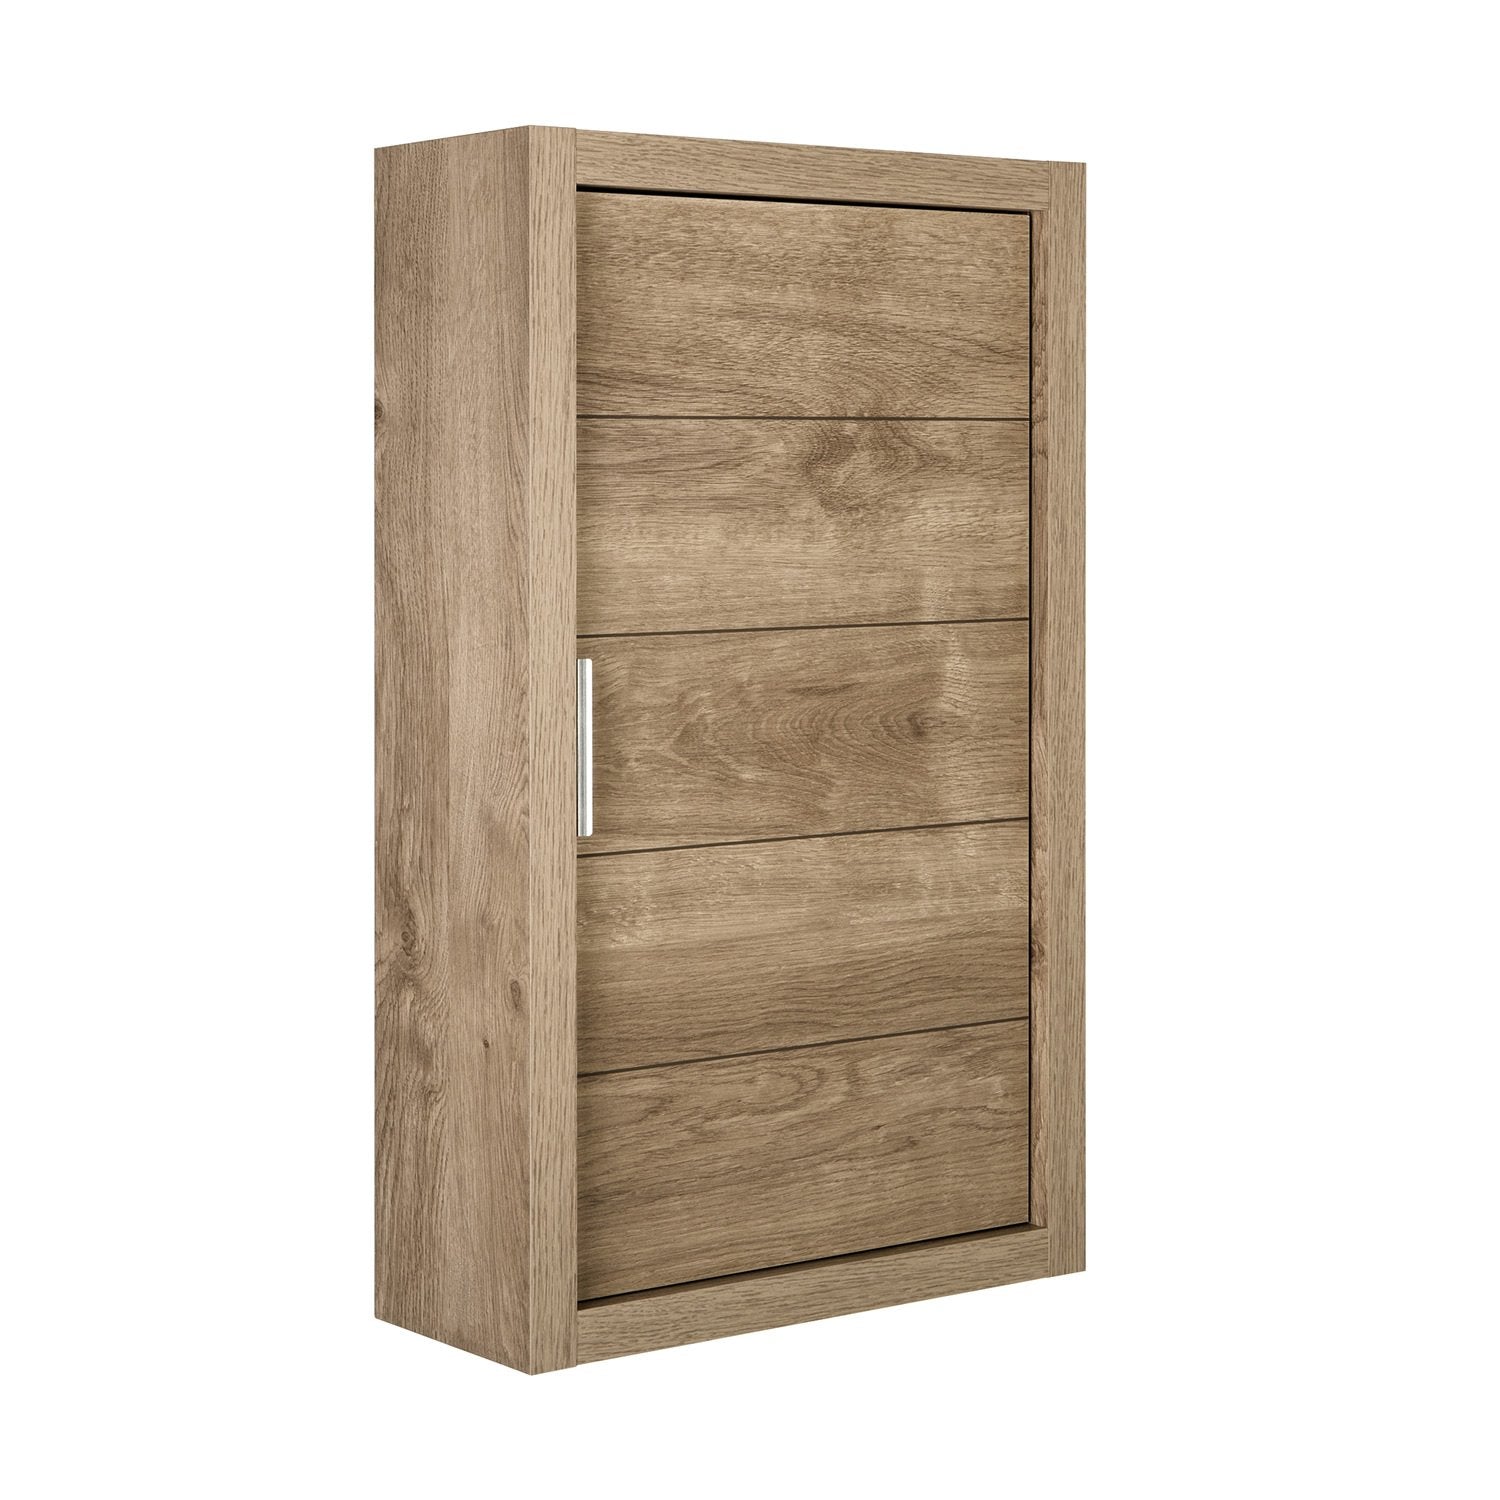 16" Small Side Cabinet, Wall Mount, 1 Door with Handle and Soft Close and Reversible Opening, Oak, Serie Tino by VALENZUELA